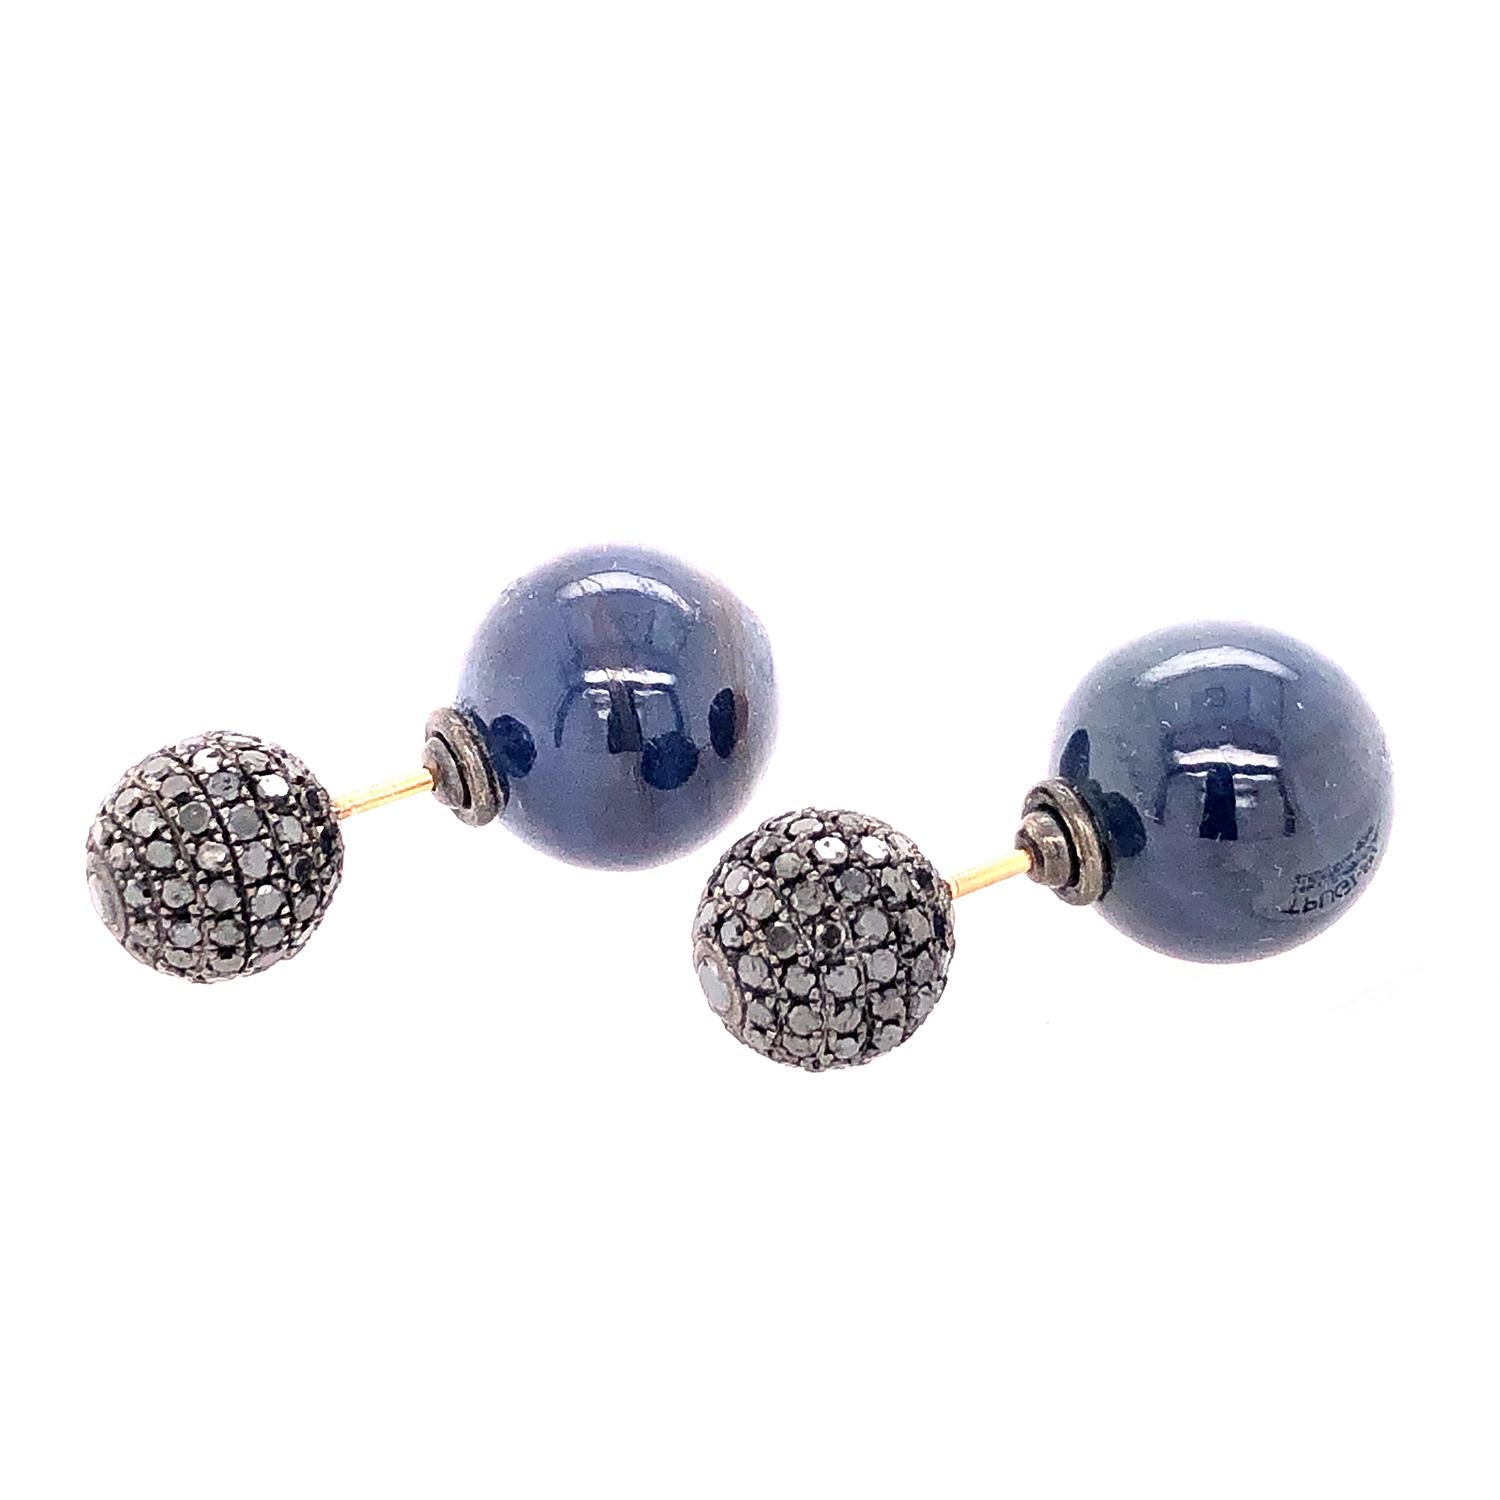 Sapphire & Pave Diamond Ball Tunnel Earrings Made in 14k Gold & Silver (Kunsthandwerker*in) im Angebot